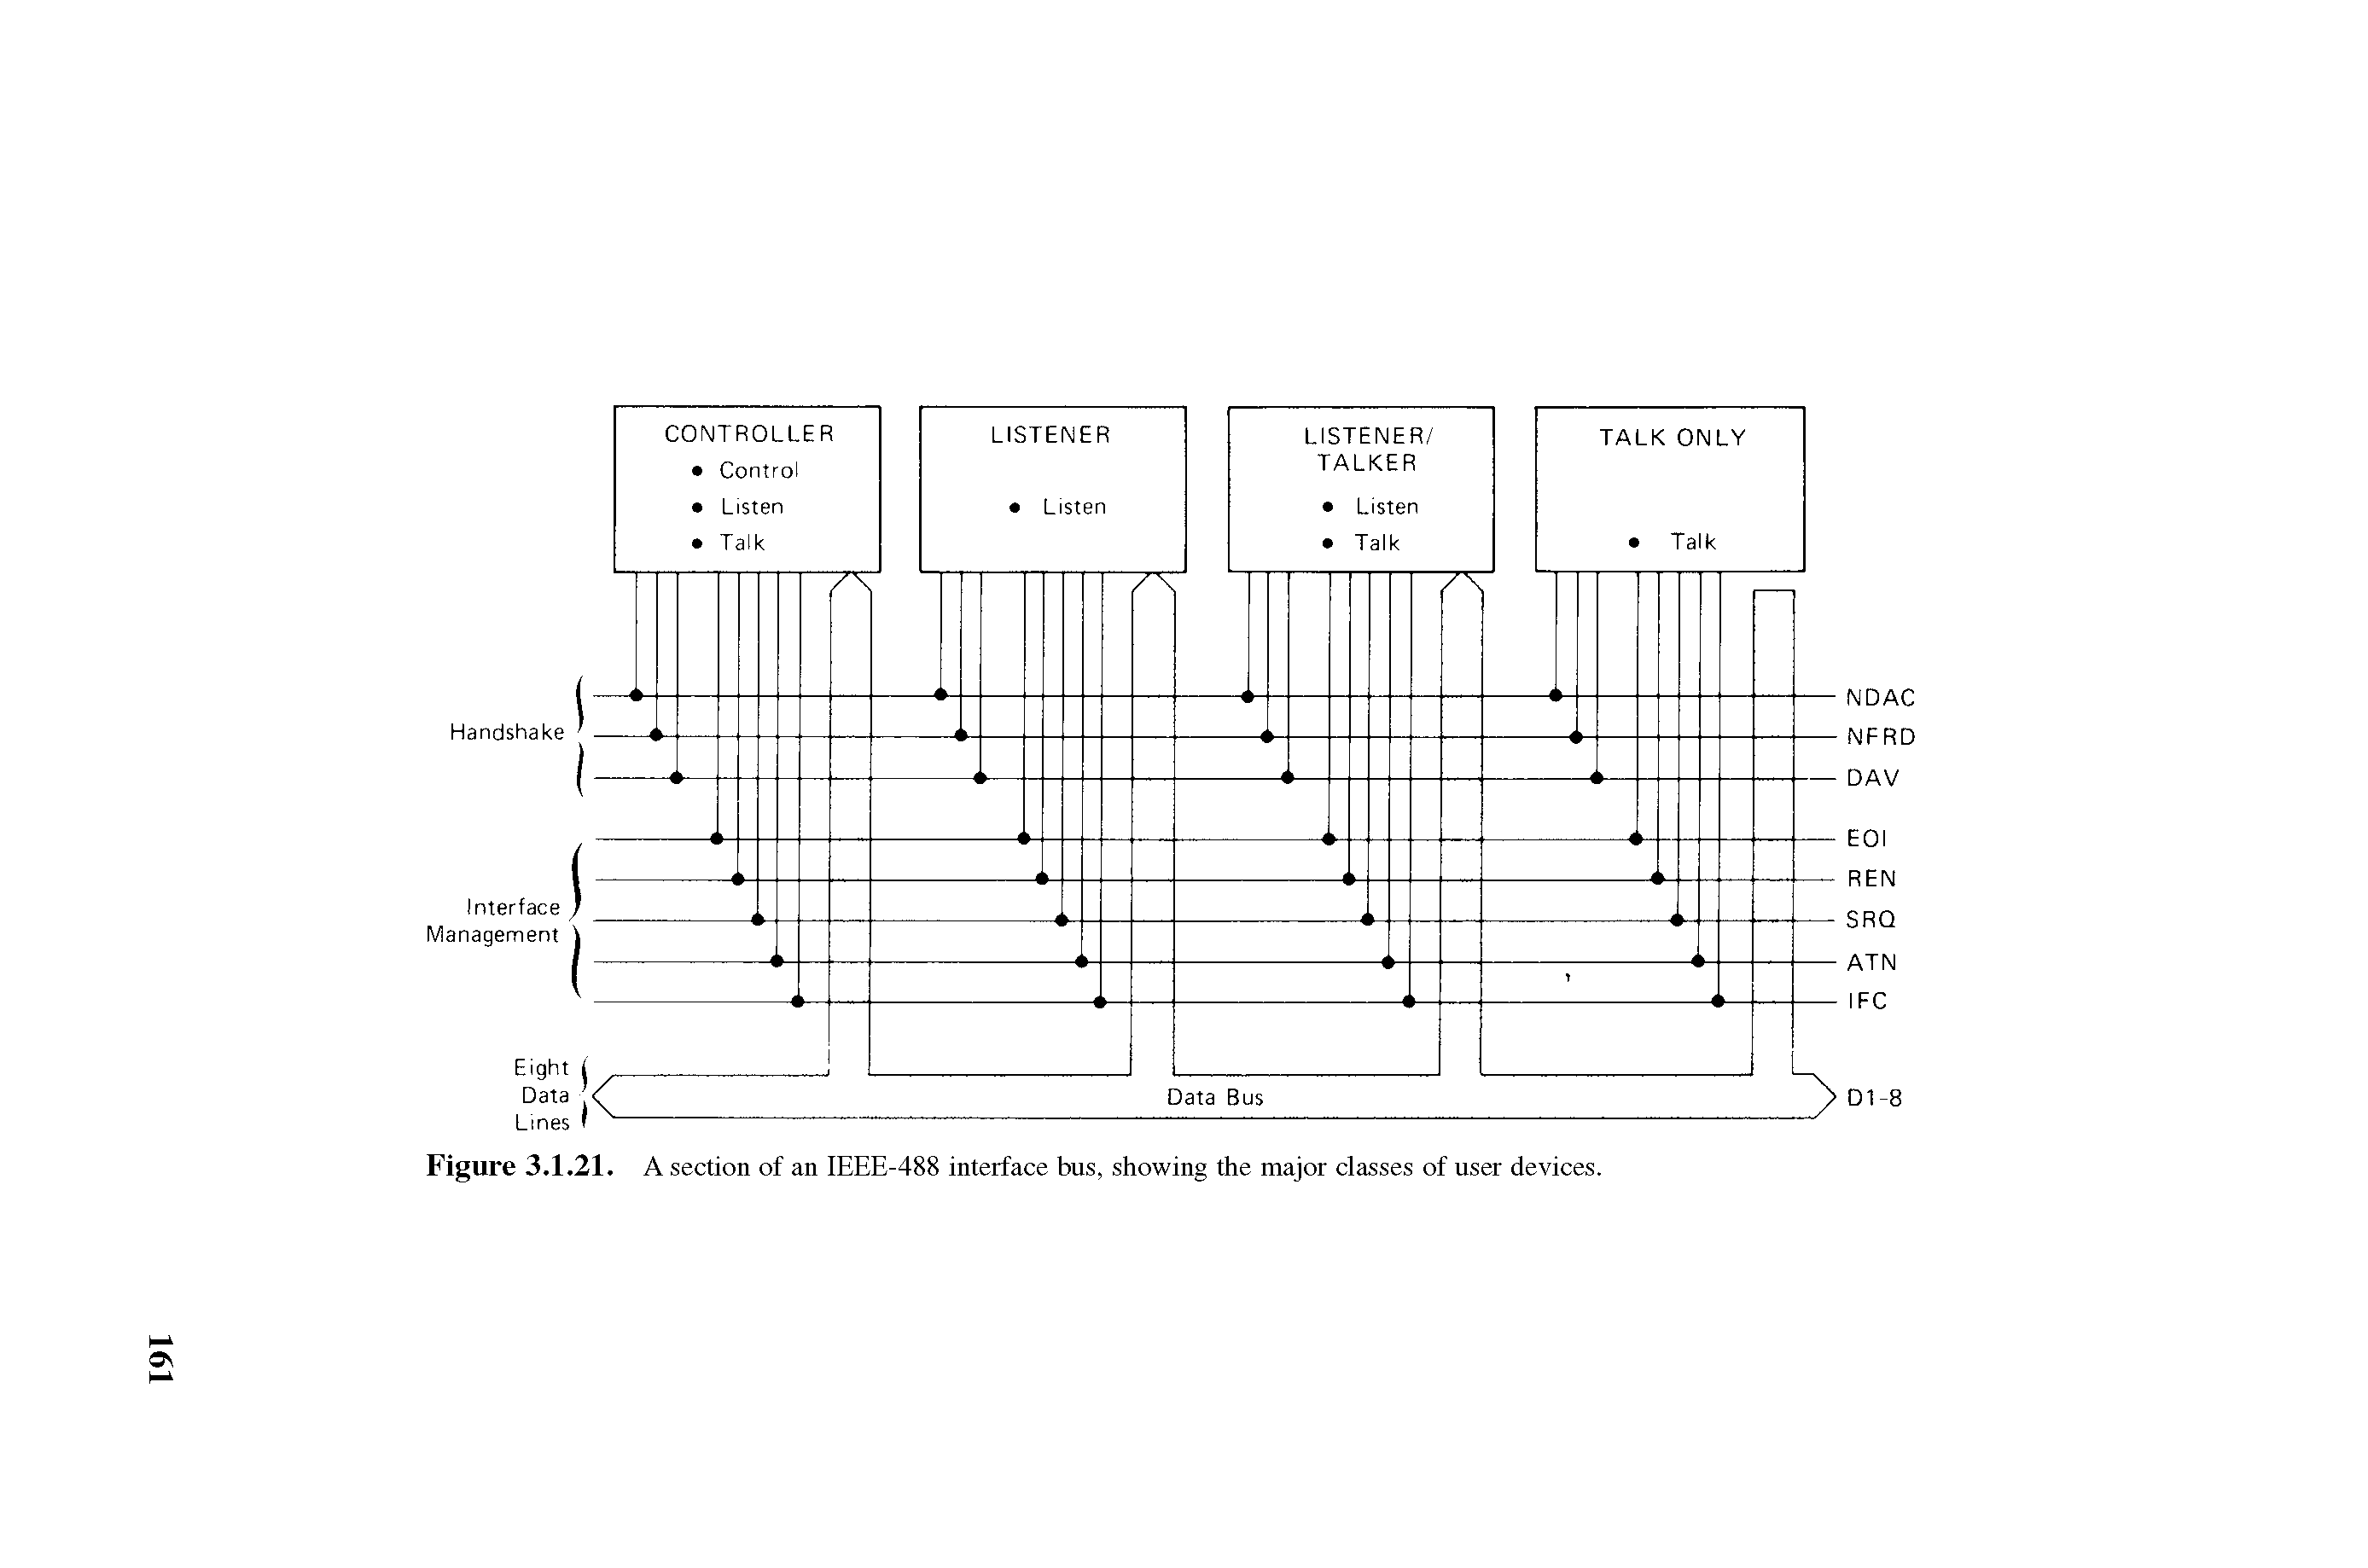 Figure 3.1.21. A section of an IEEE-488 interface bus, showing the major classes of user devices.